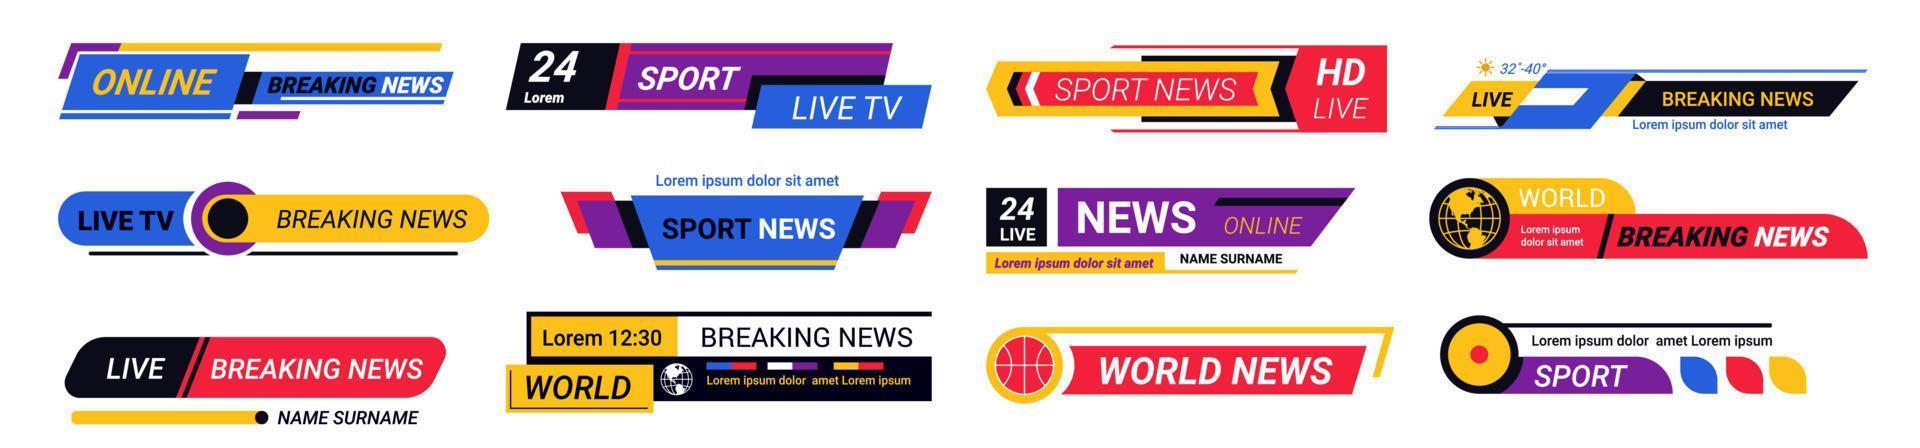 Breaking news banner for sports events summary vector